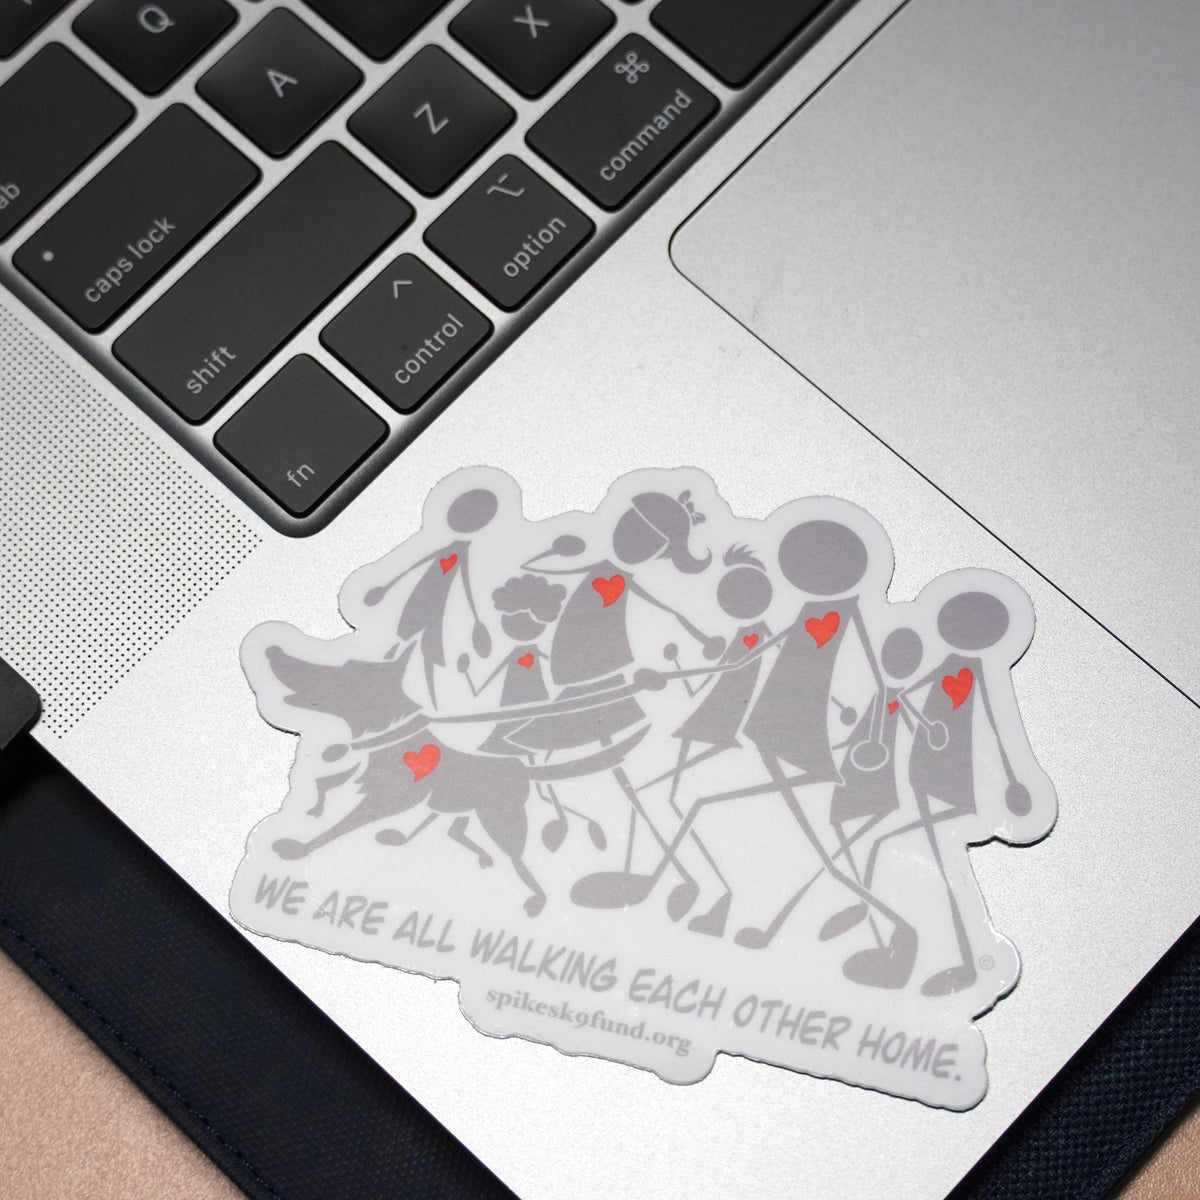 We Are All Walking Each Other Home - Sticker